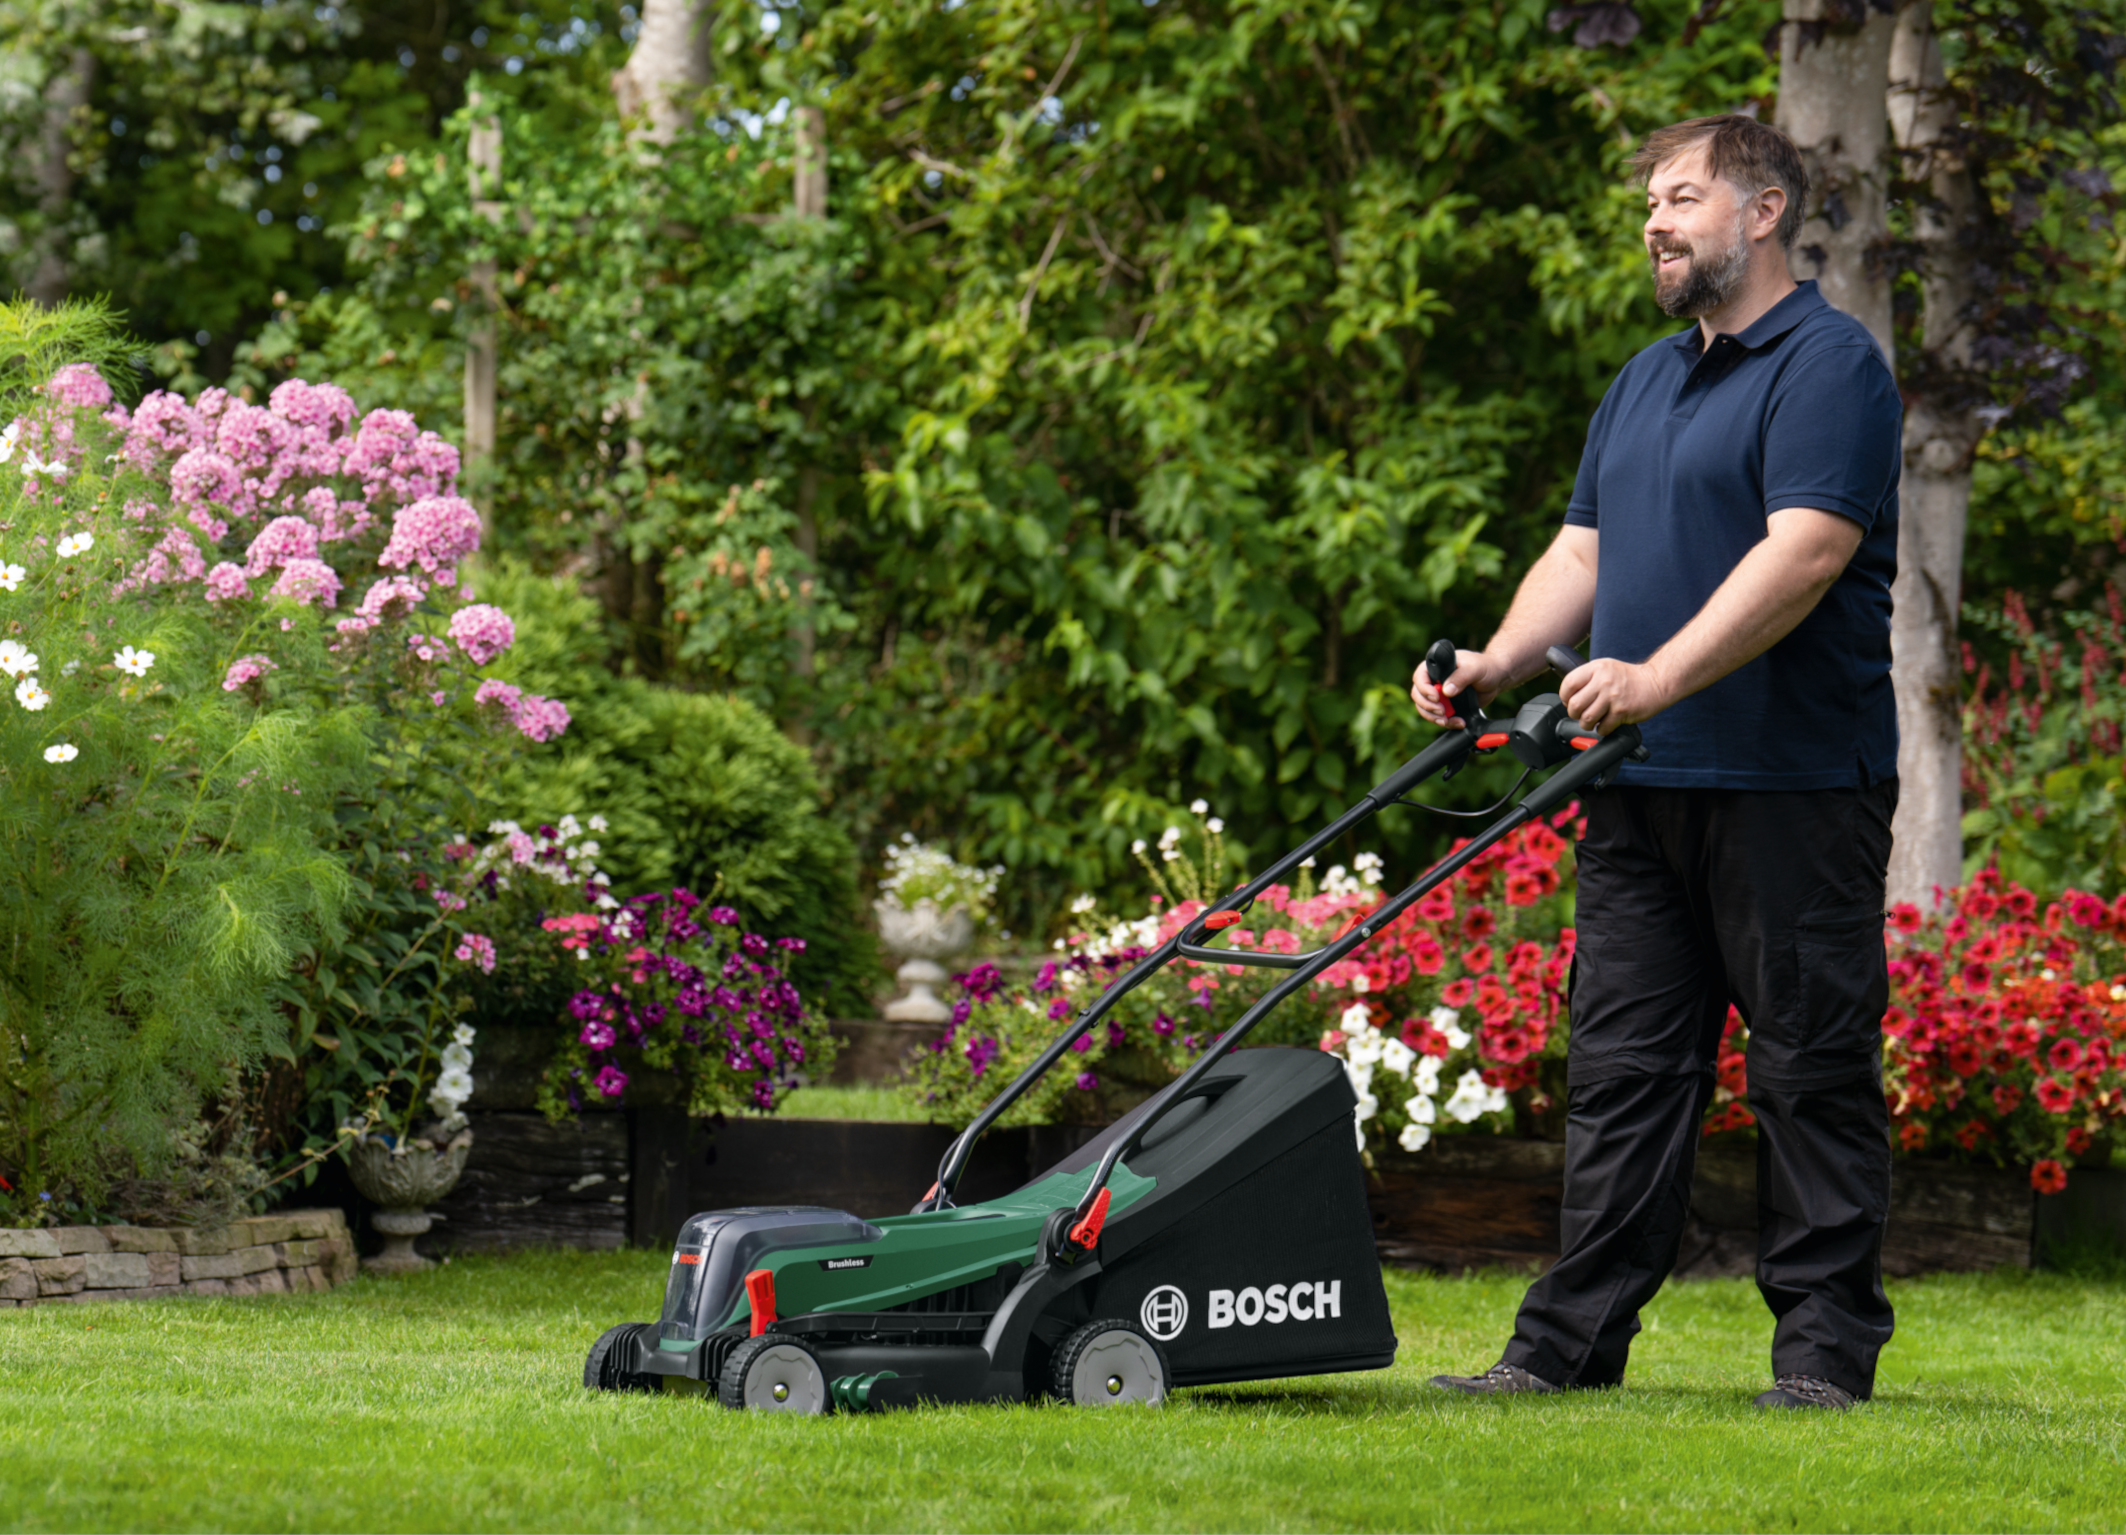 Ergonomic mowing, right up to the edge: First cordless lawnmower from Bosch with two batteries